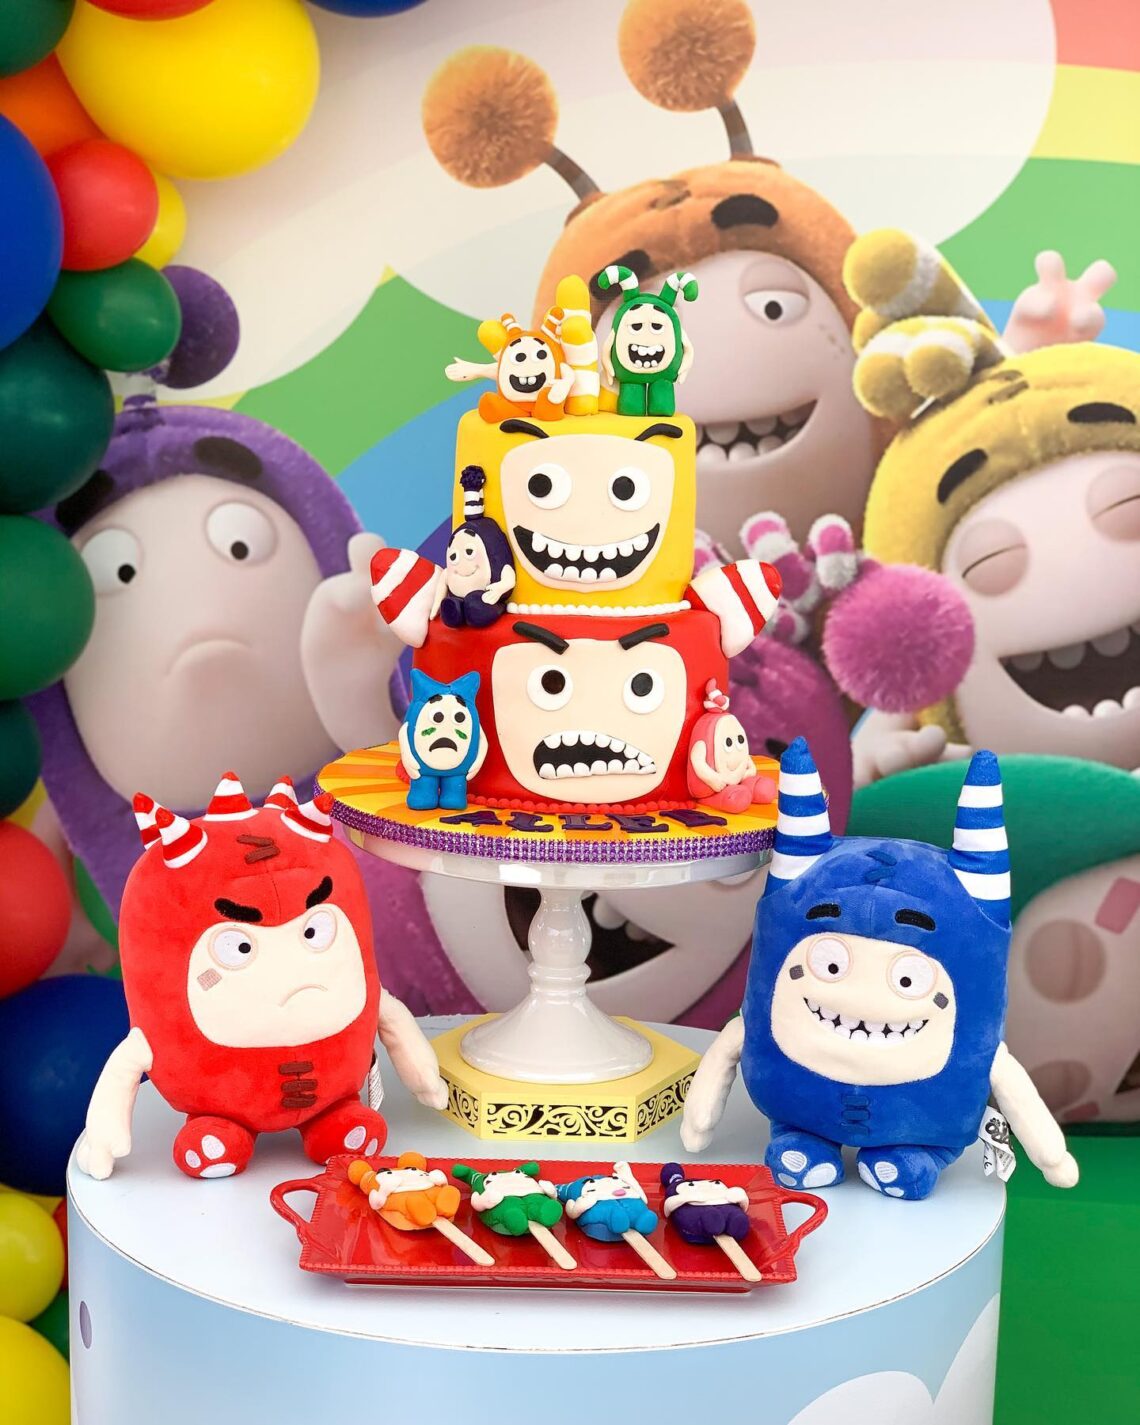 Oddbods Party Decorations (Credit: Angie's Dream Decorations)